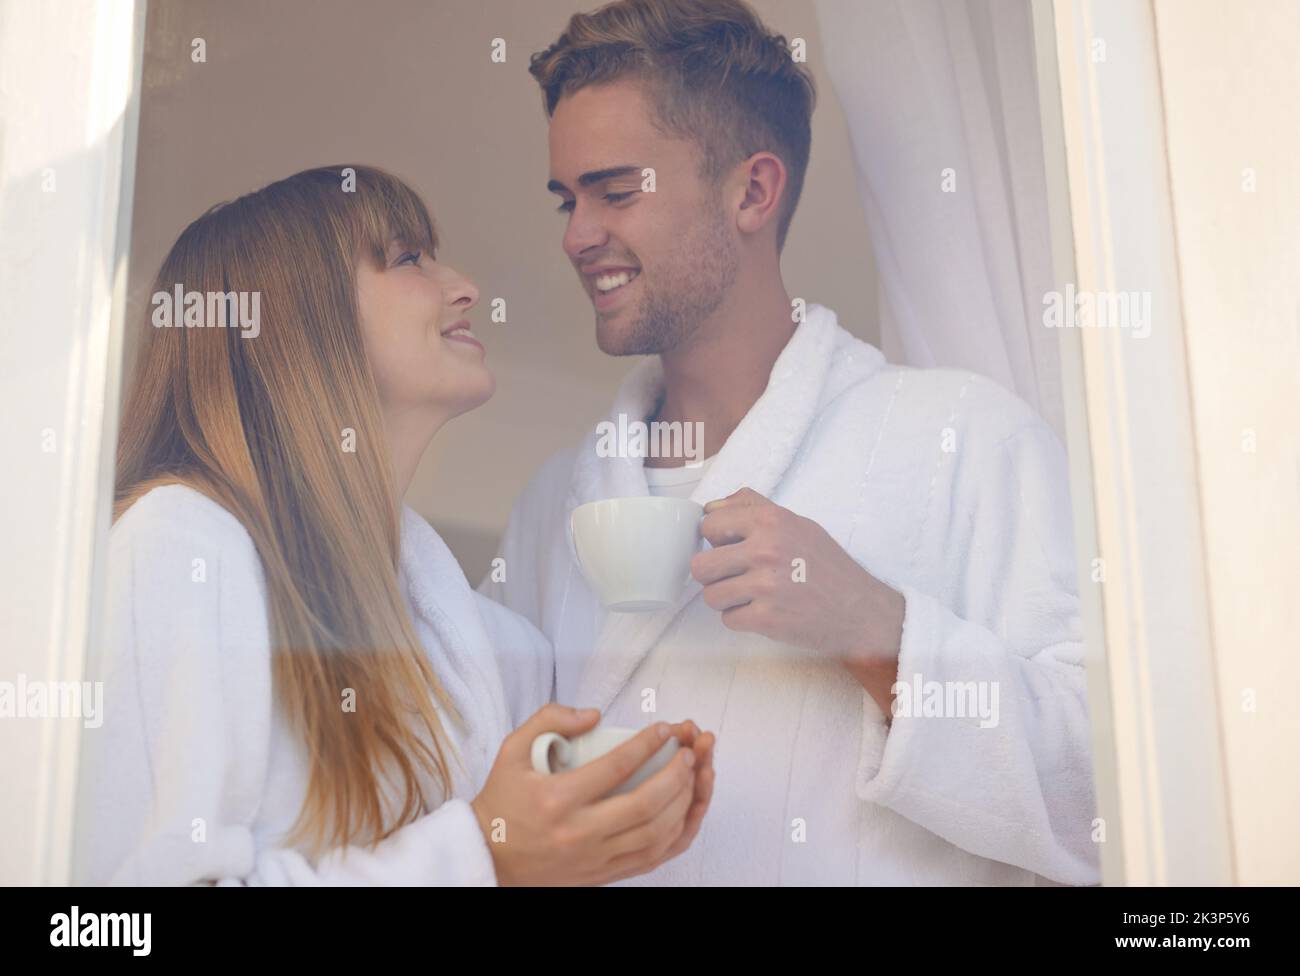 Starting the day together. A young couple drinking coffee while standing at a window wearing bathrobes. Stock Photo